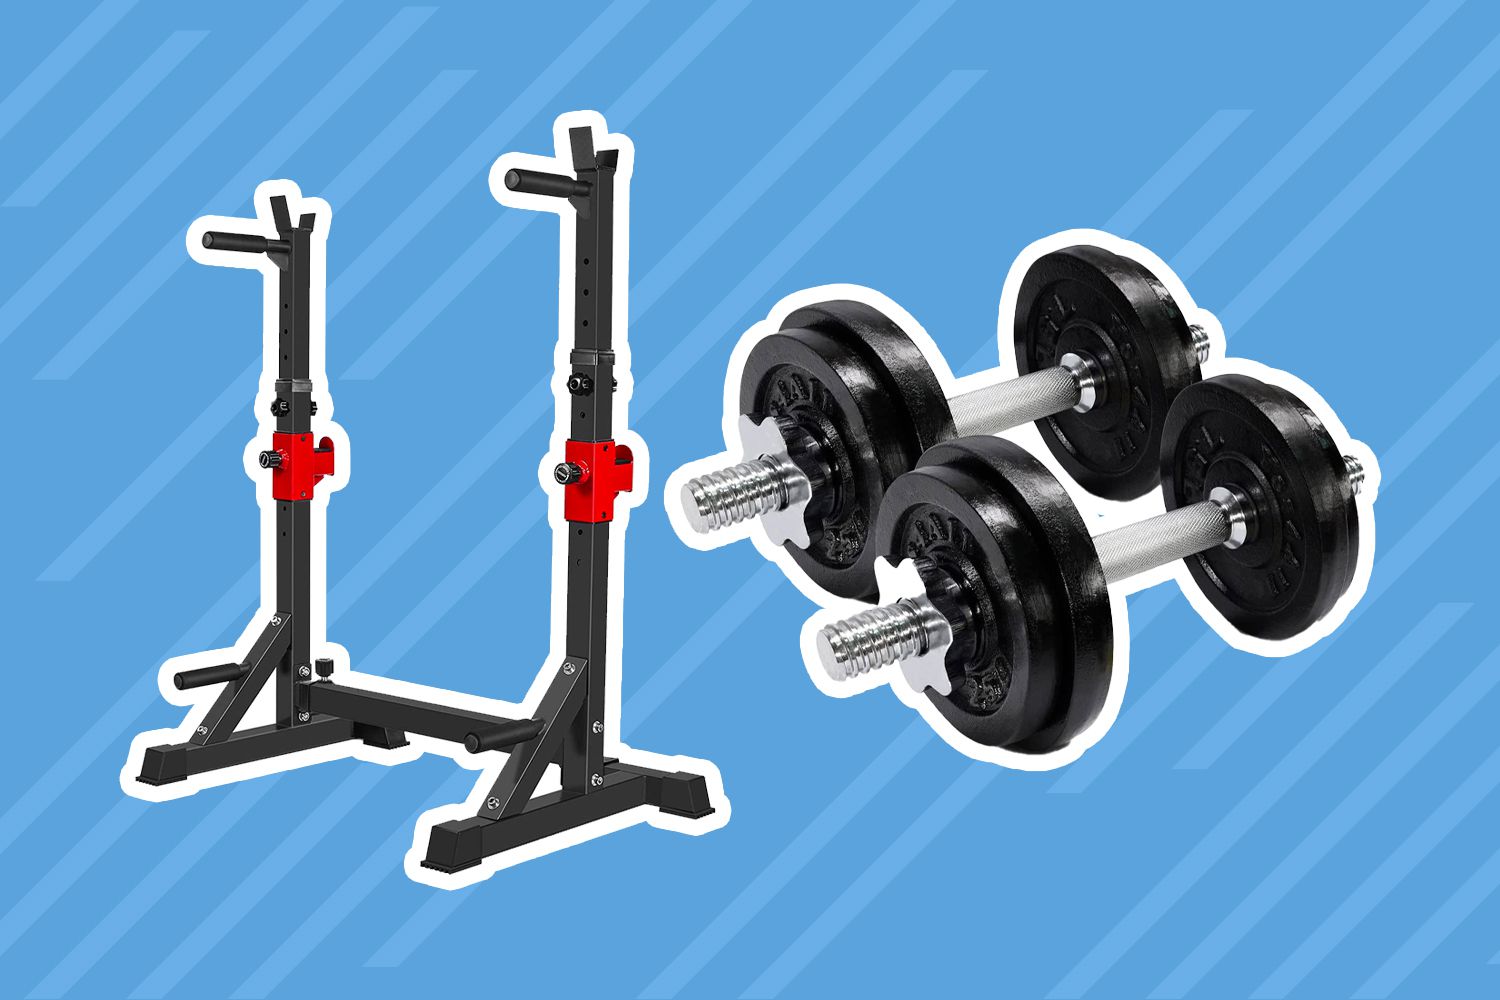 Collage of budget home gym equipment we recommend on a blue background